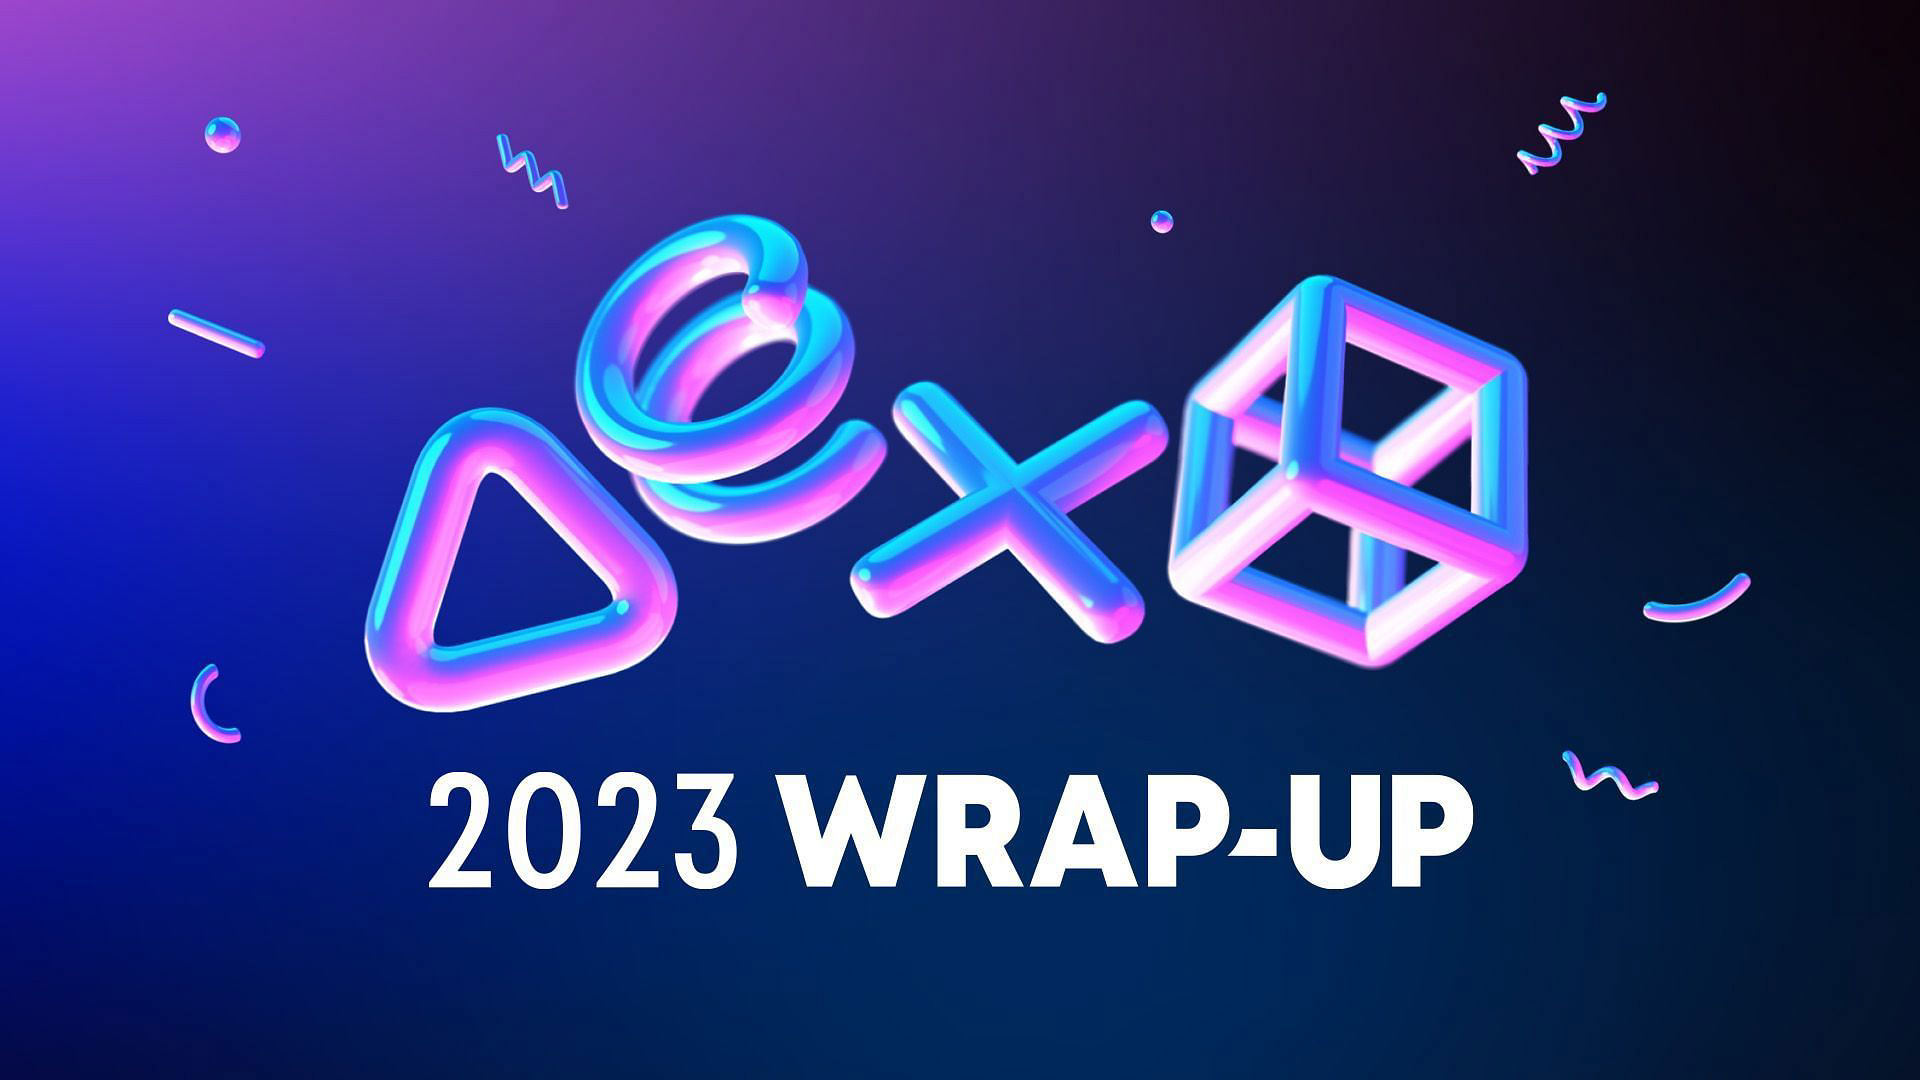 How to get your PlayStation 2023 WrapUp